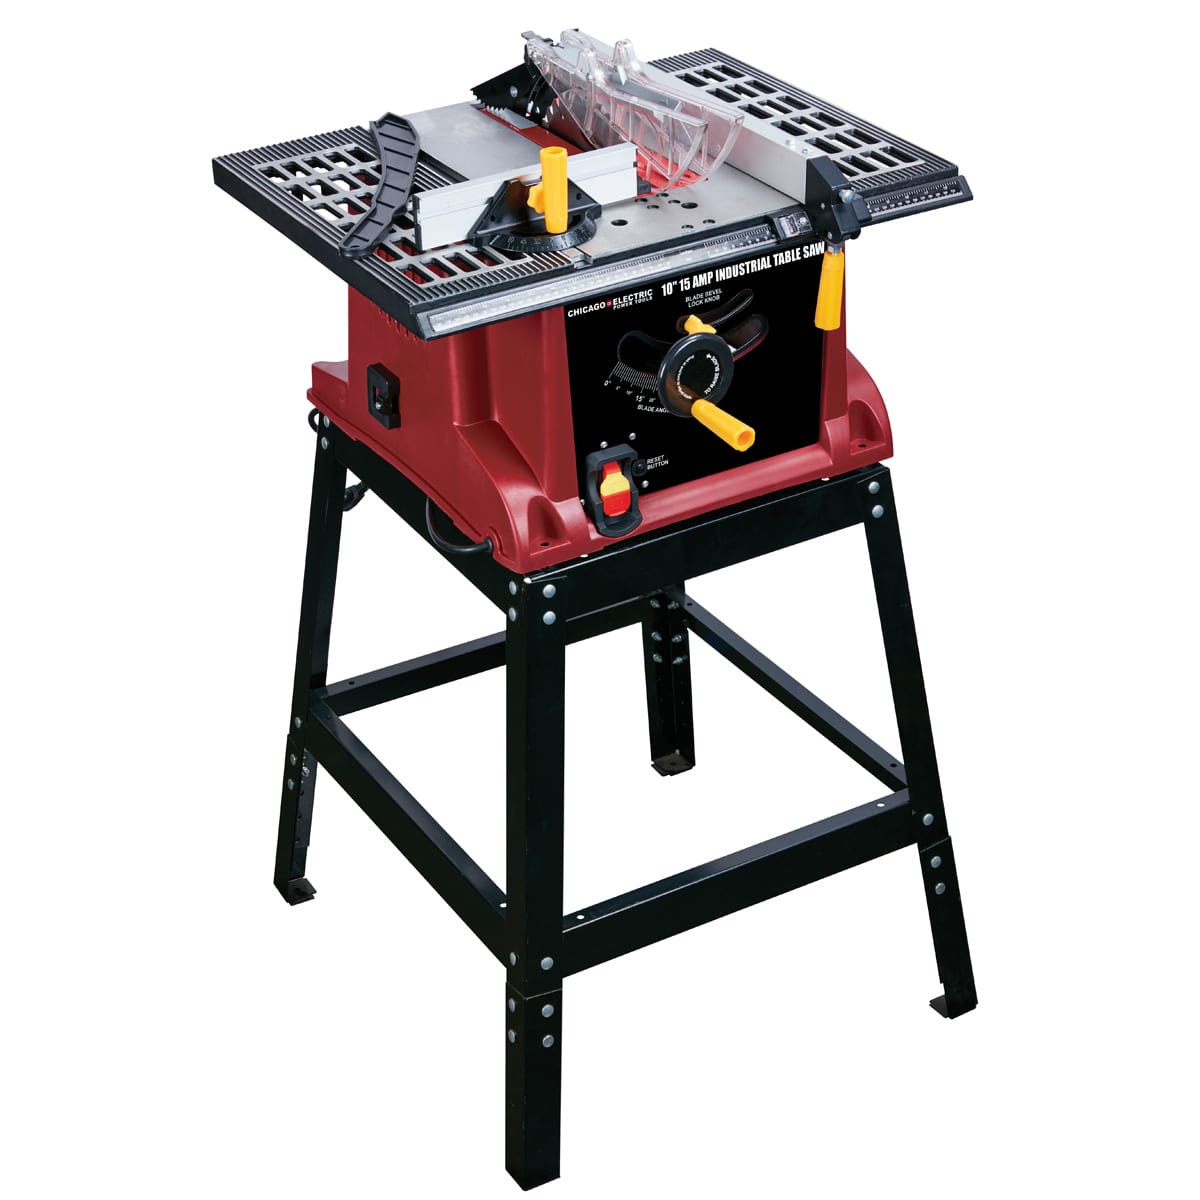 Comparison Review Ryobi Table Saw Vs, Chicago Electric Table Saw Fence